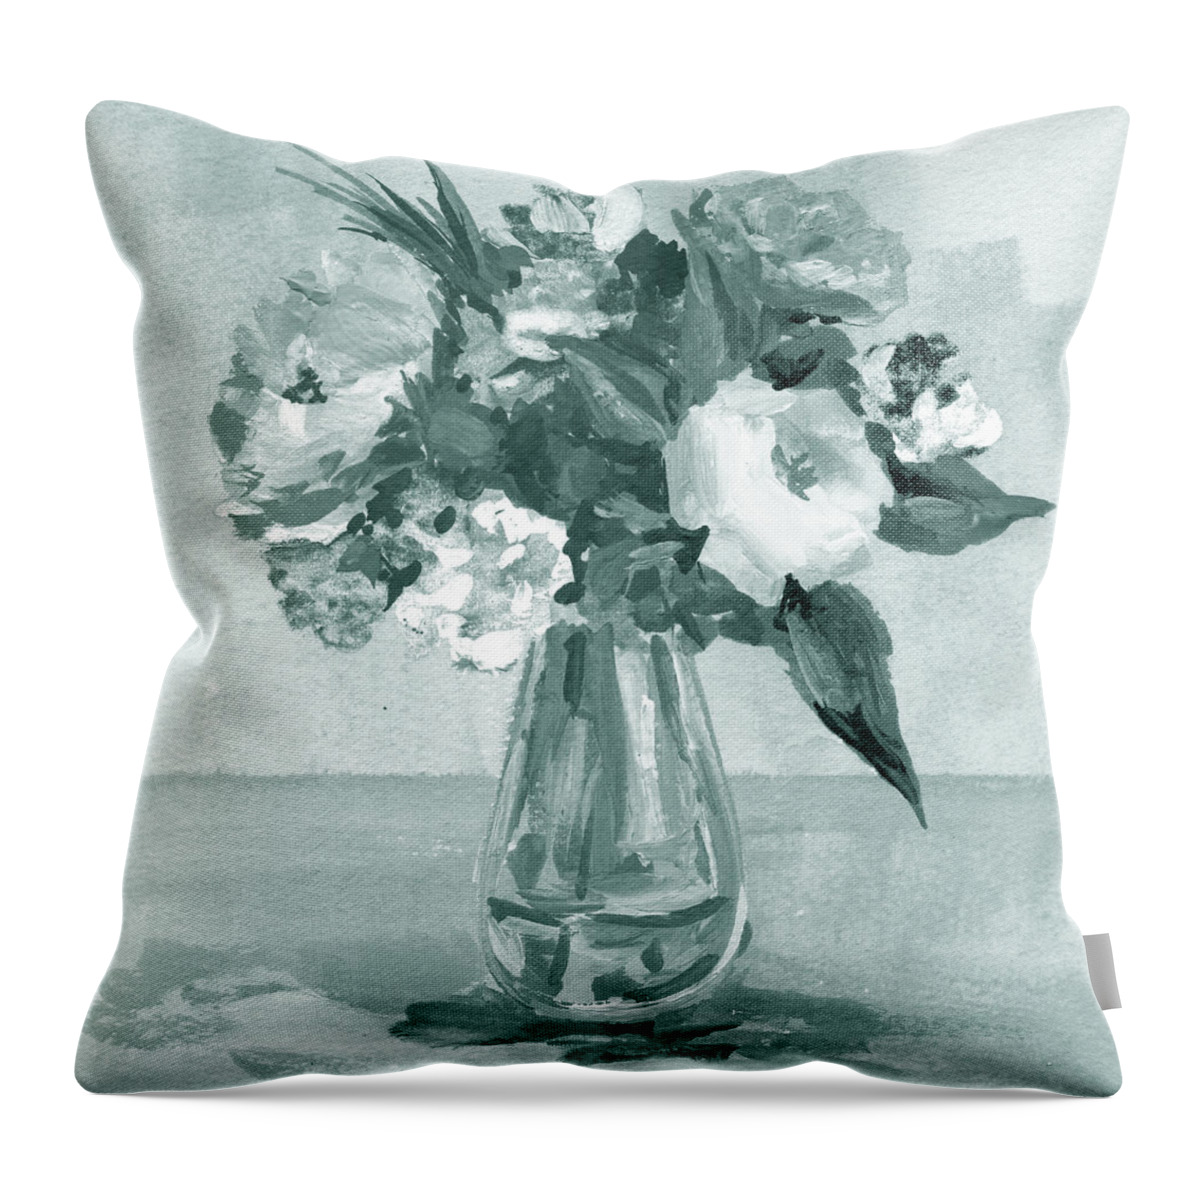 Flowers Throw Pillow featuring the painting Soft Vintage Teal Gray Flowers Bouquet Summer Floral Impressionism I by Irina Sztukowski